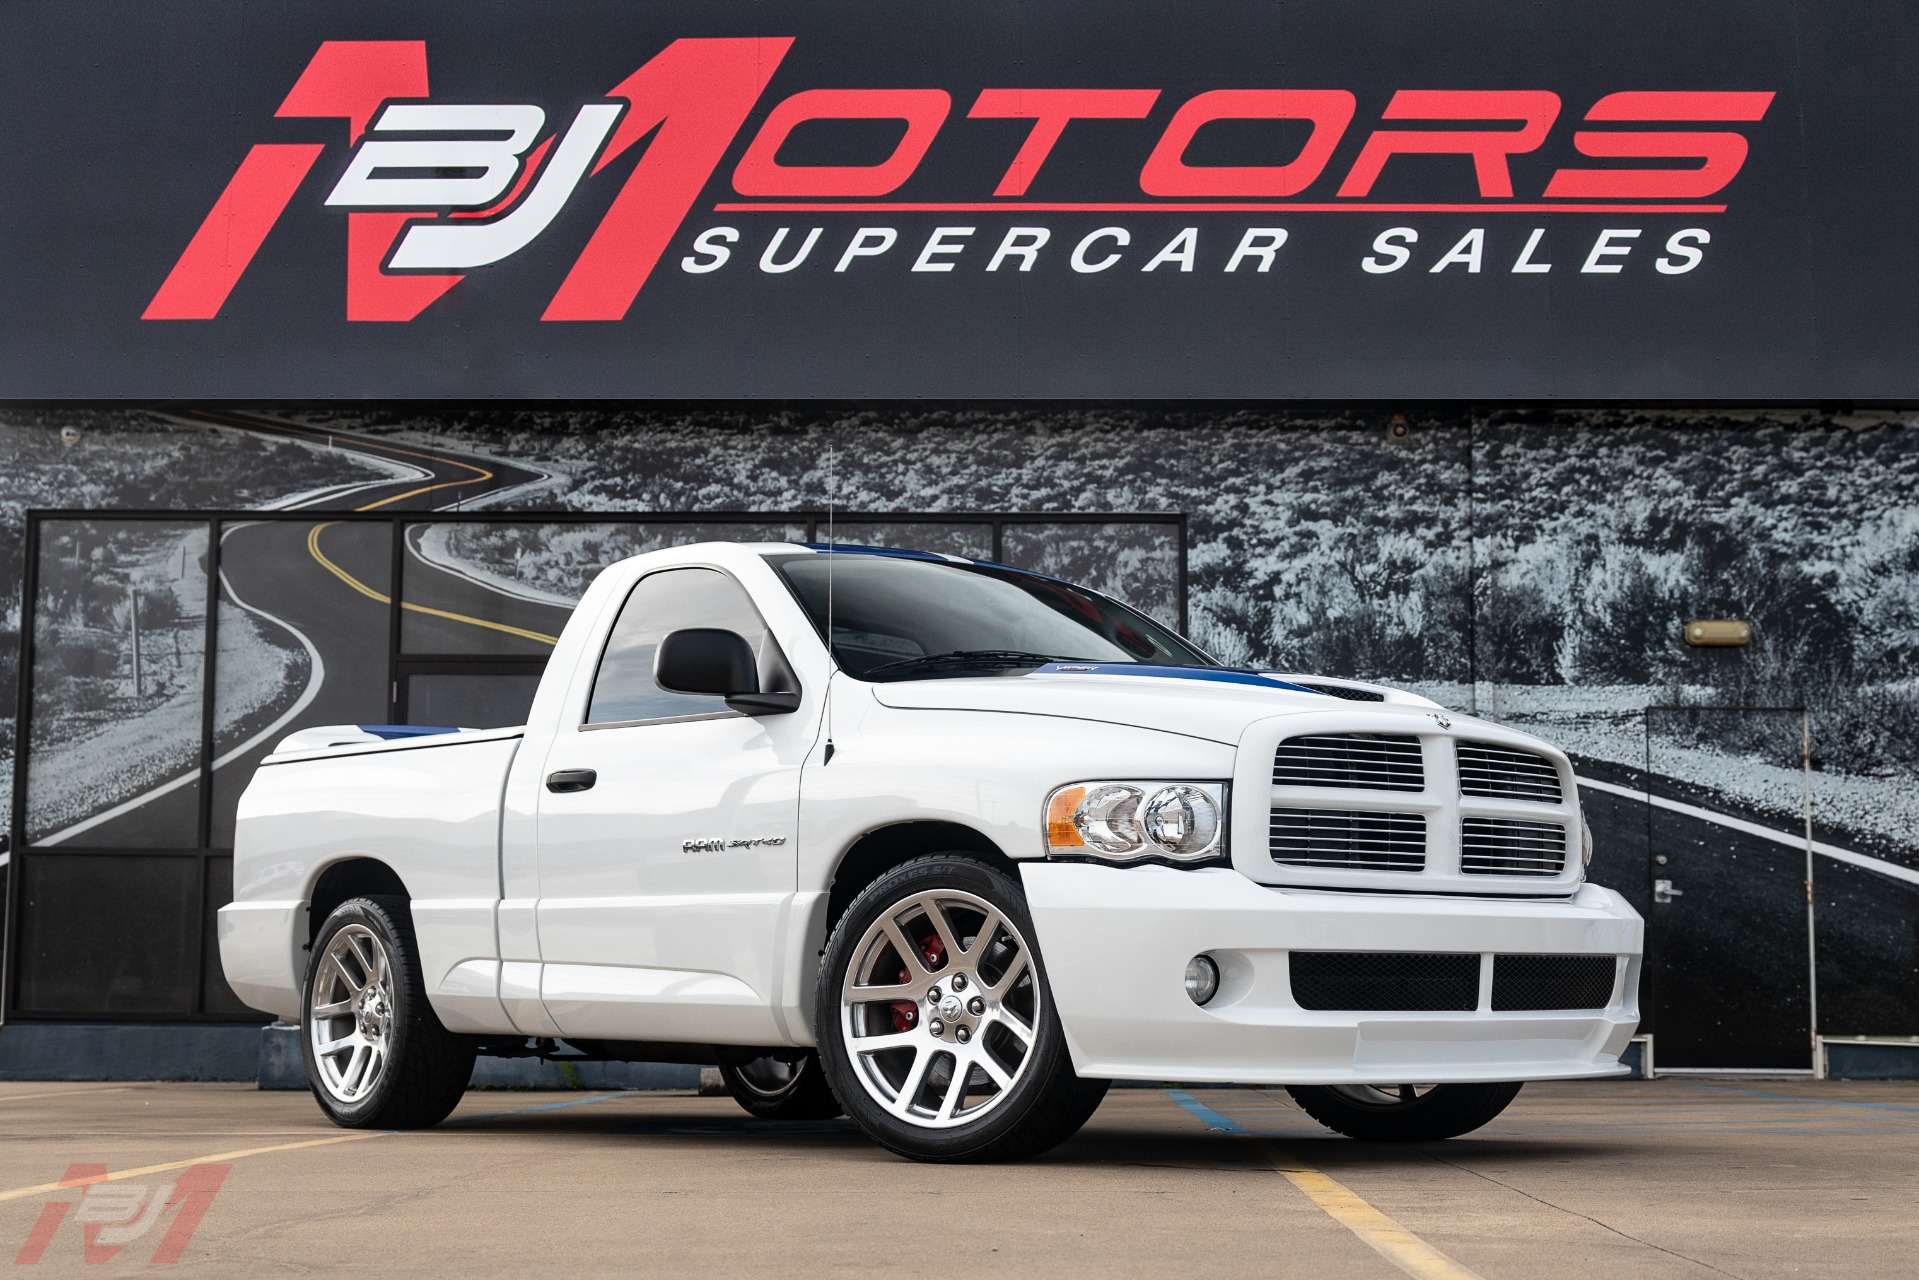 Used 2005 Ram 1500 SRT-10 Commemorative Edition For (Special Pricing) | BJ Motors Stock #5G858971